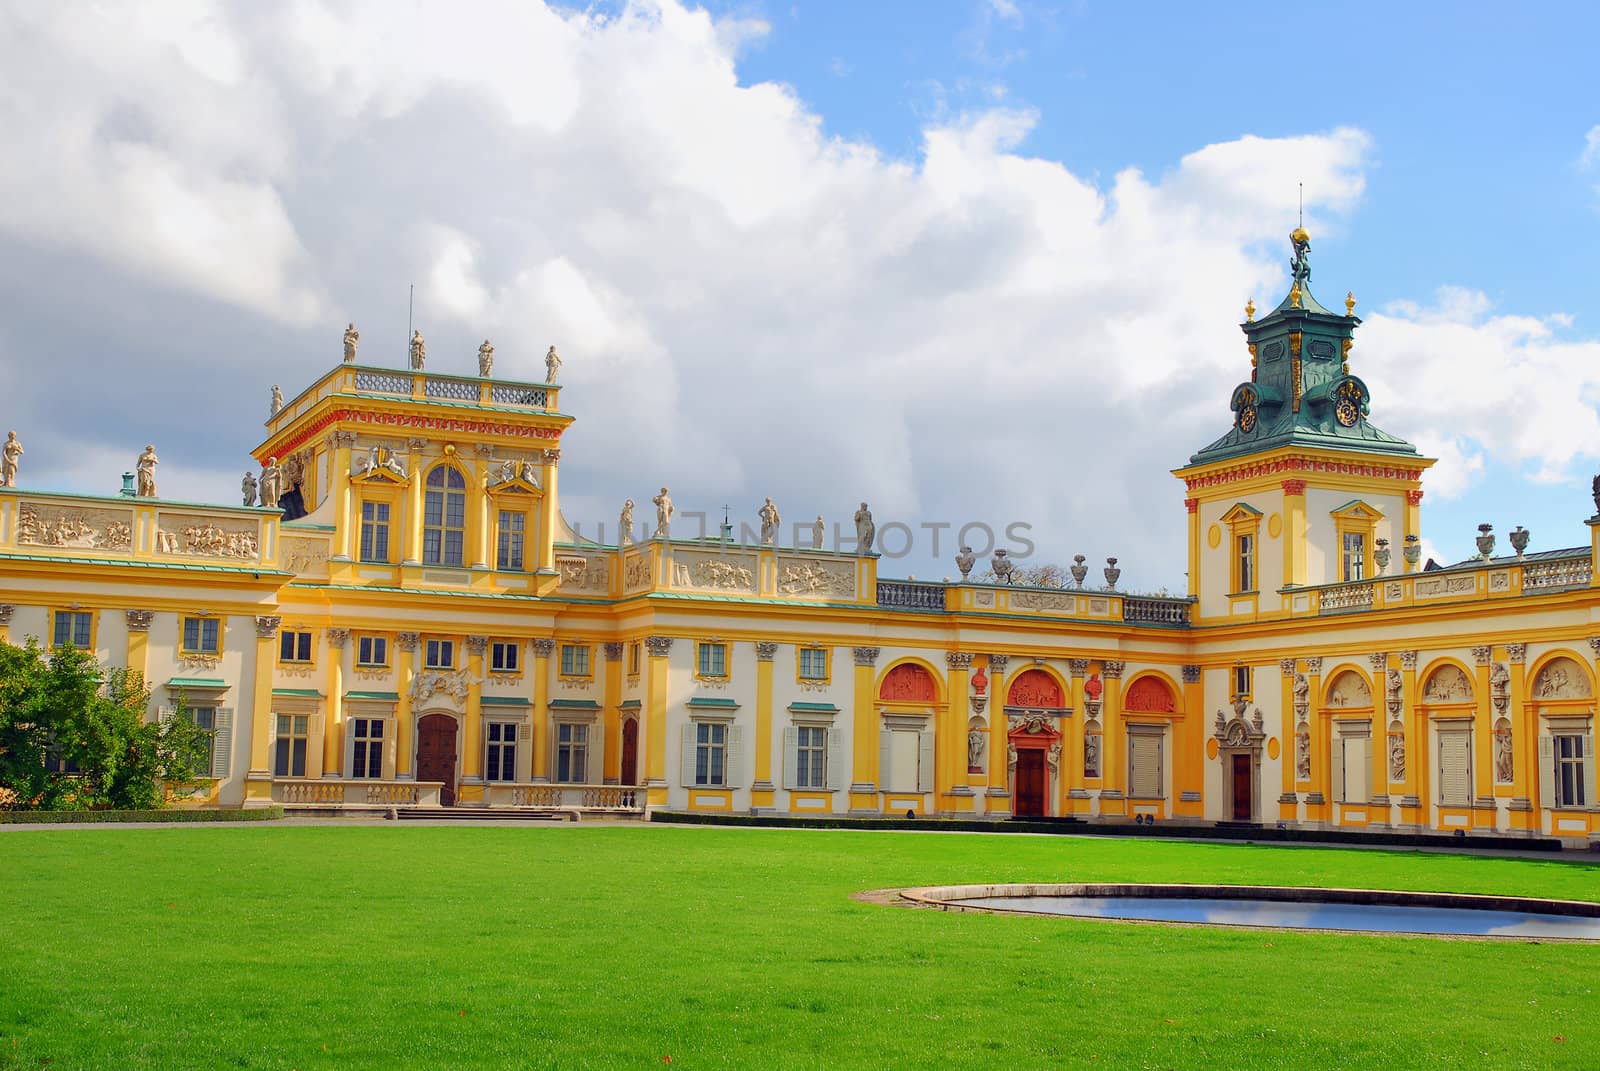 Royal Palace in Wilanow by Vectorex